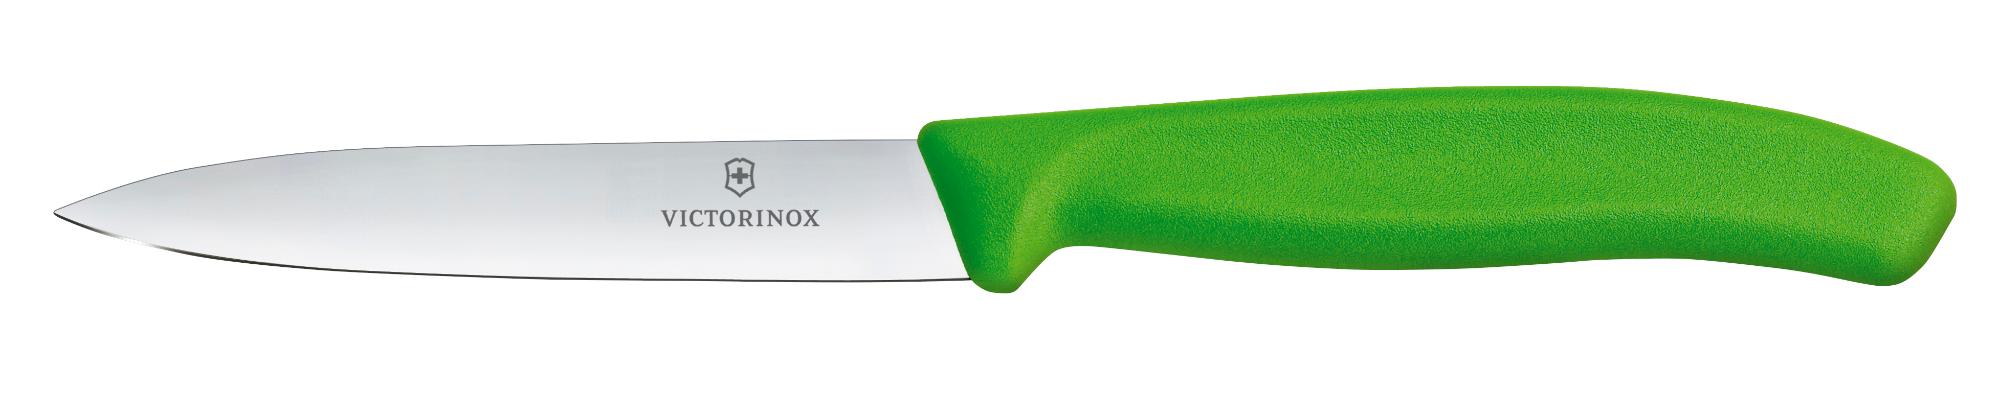 Swiss Classic vegetable knife, smooth, 10 cm - green